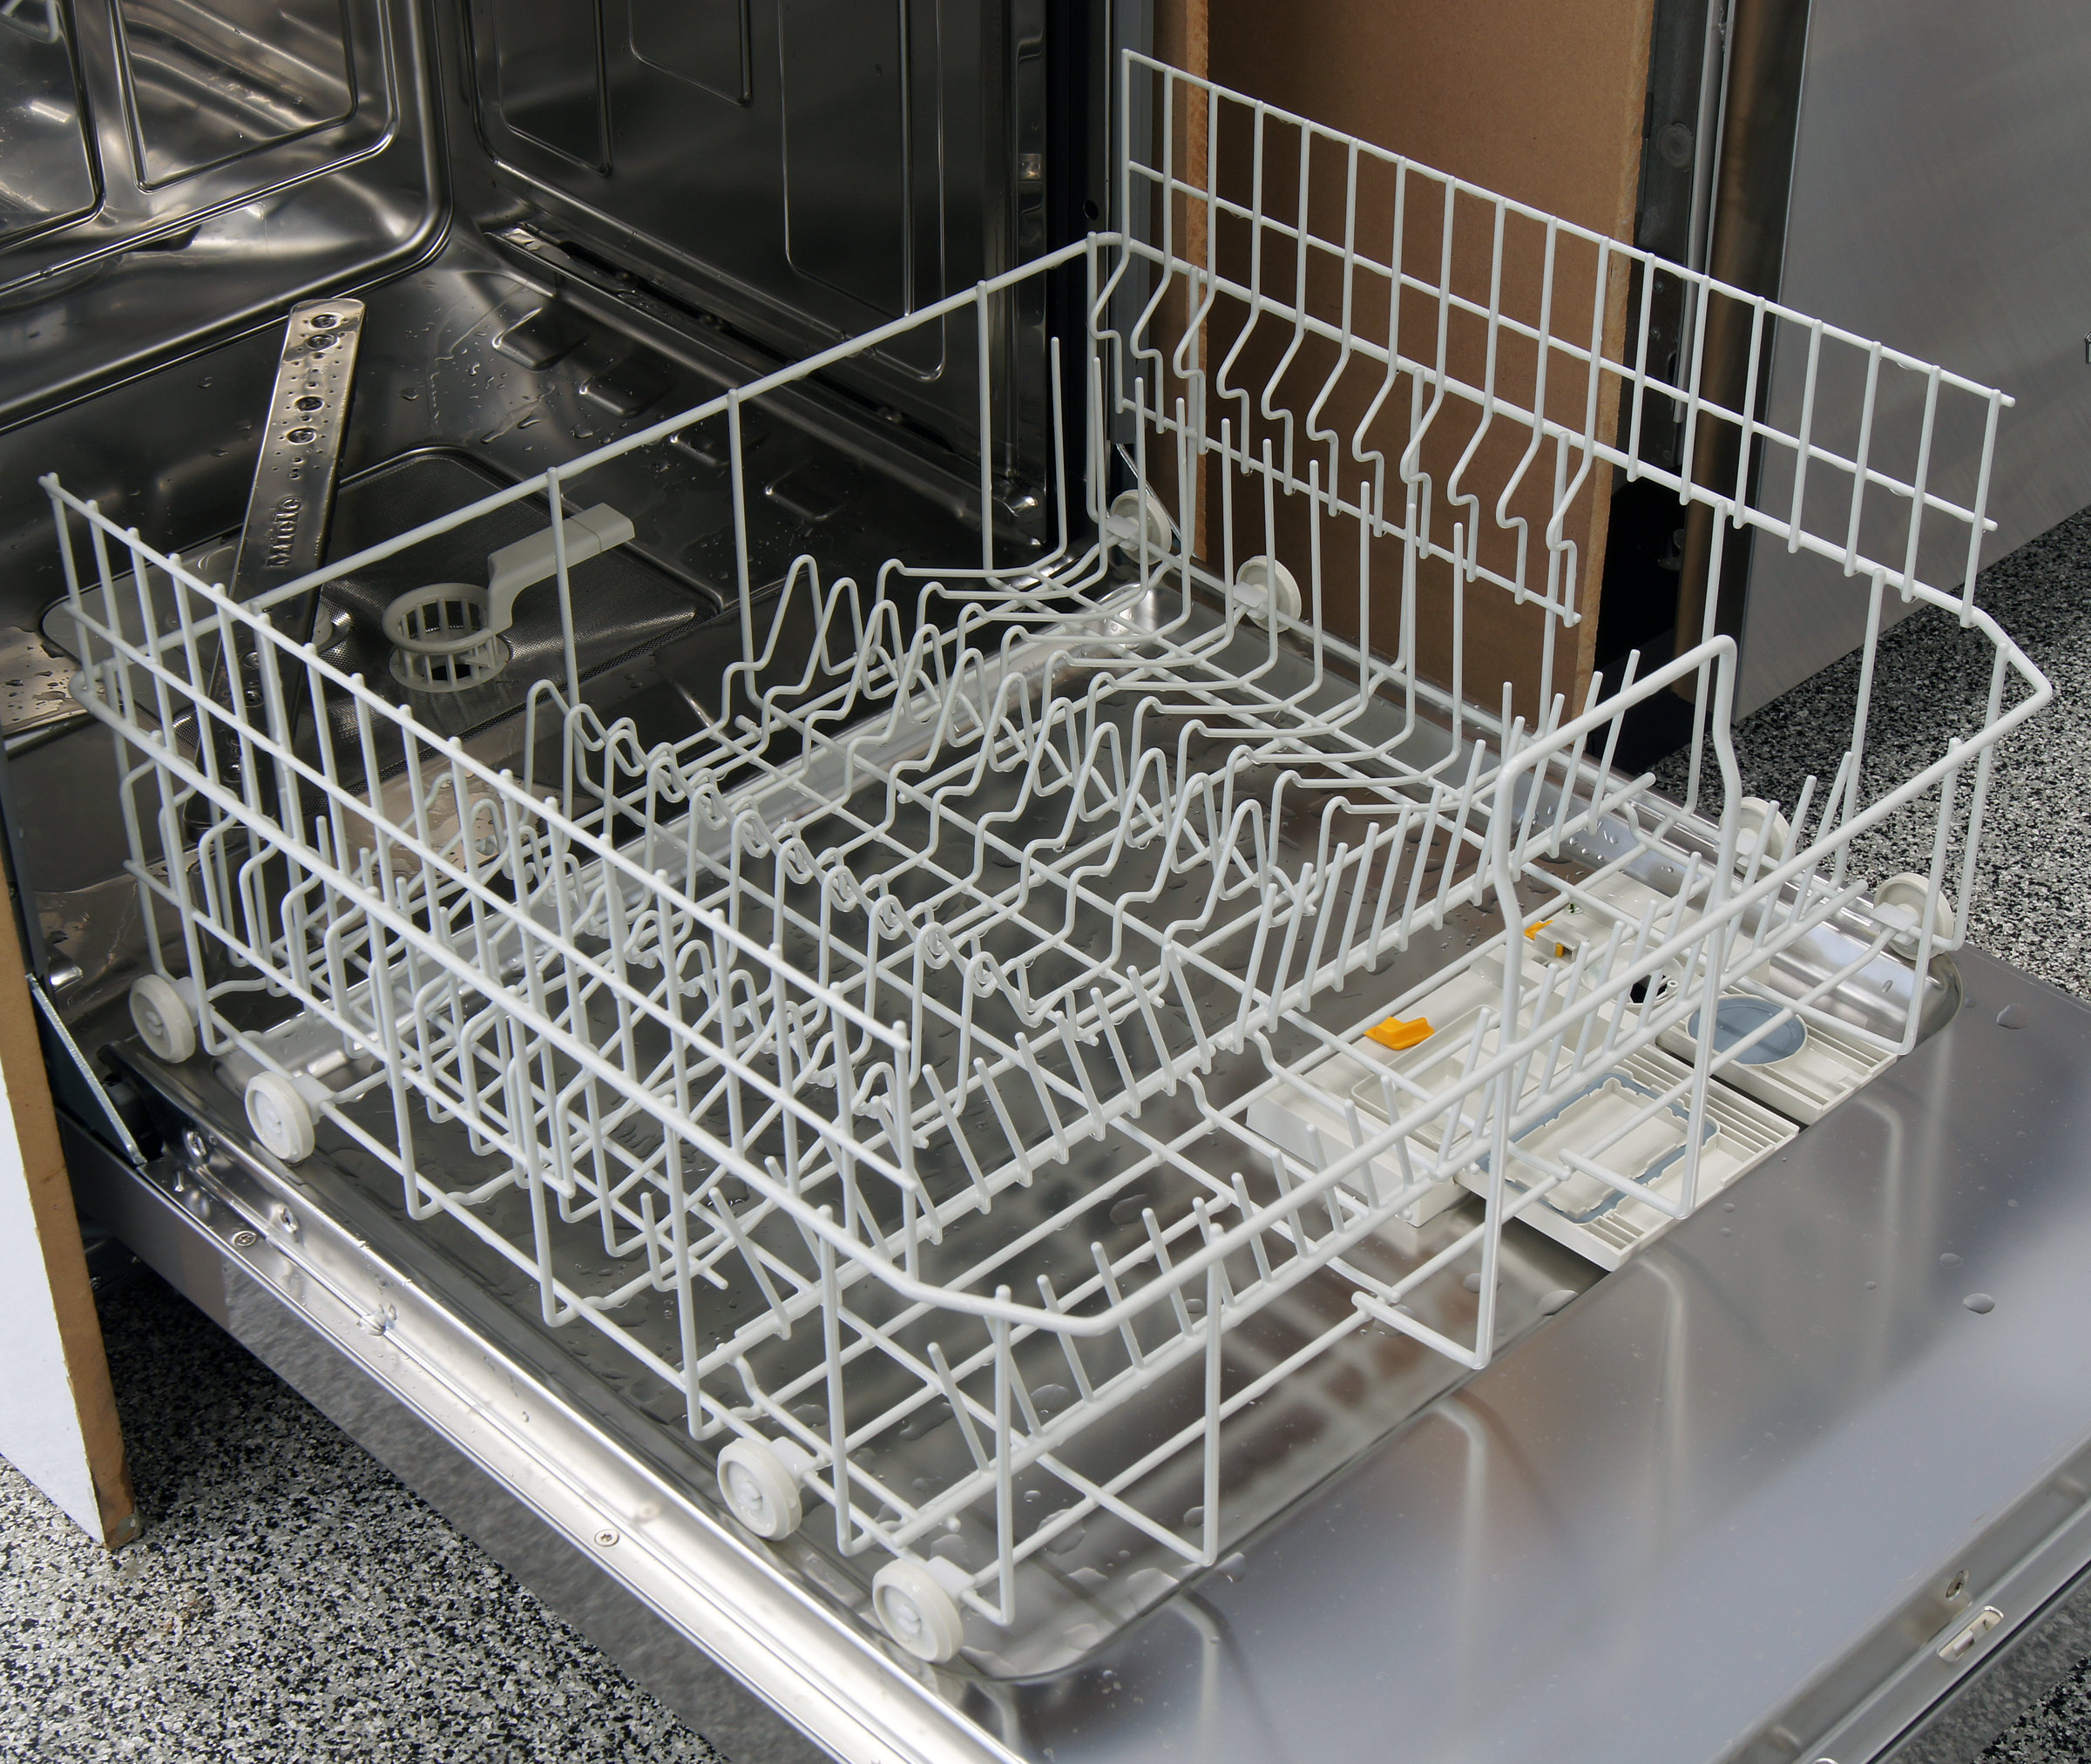 Stainless Steel Dishwasher Rack Replacement